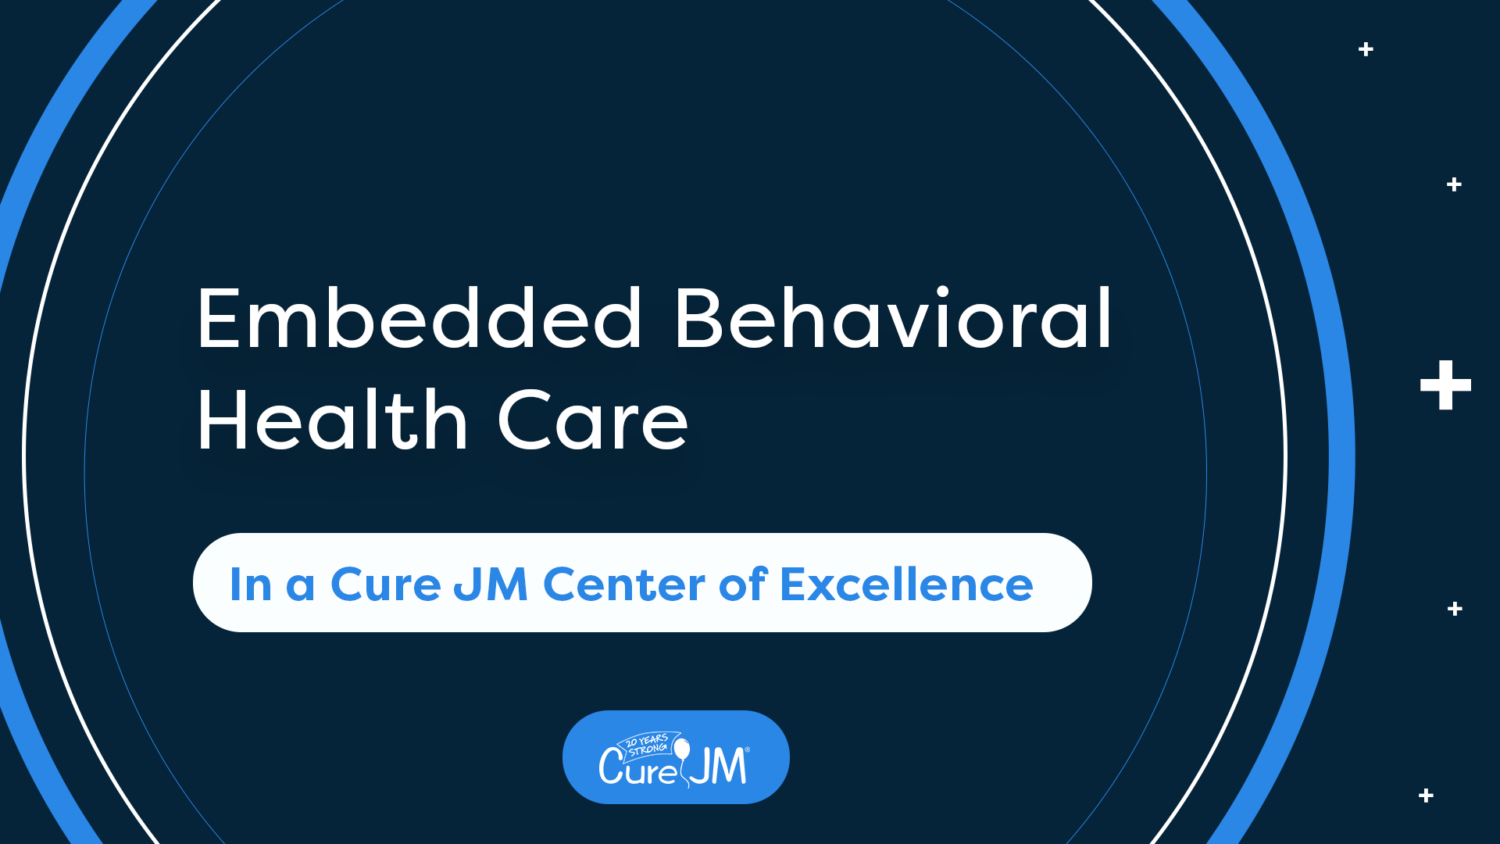 Embedded Behavioral Health Care - in a Center of Excellence